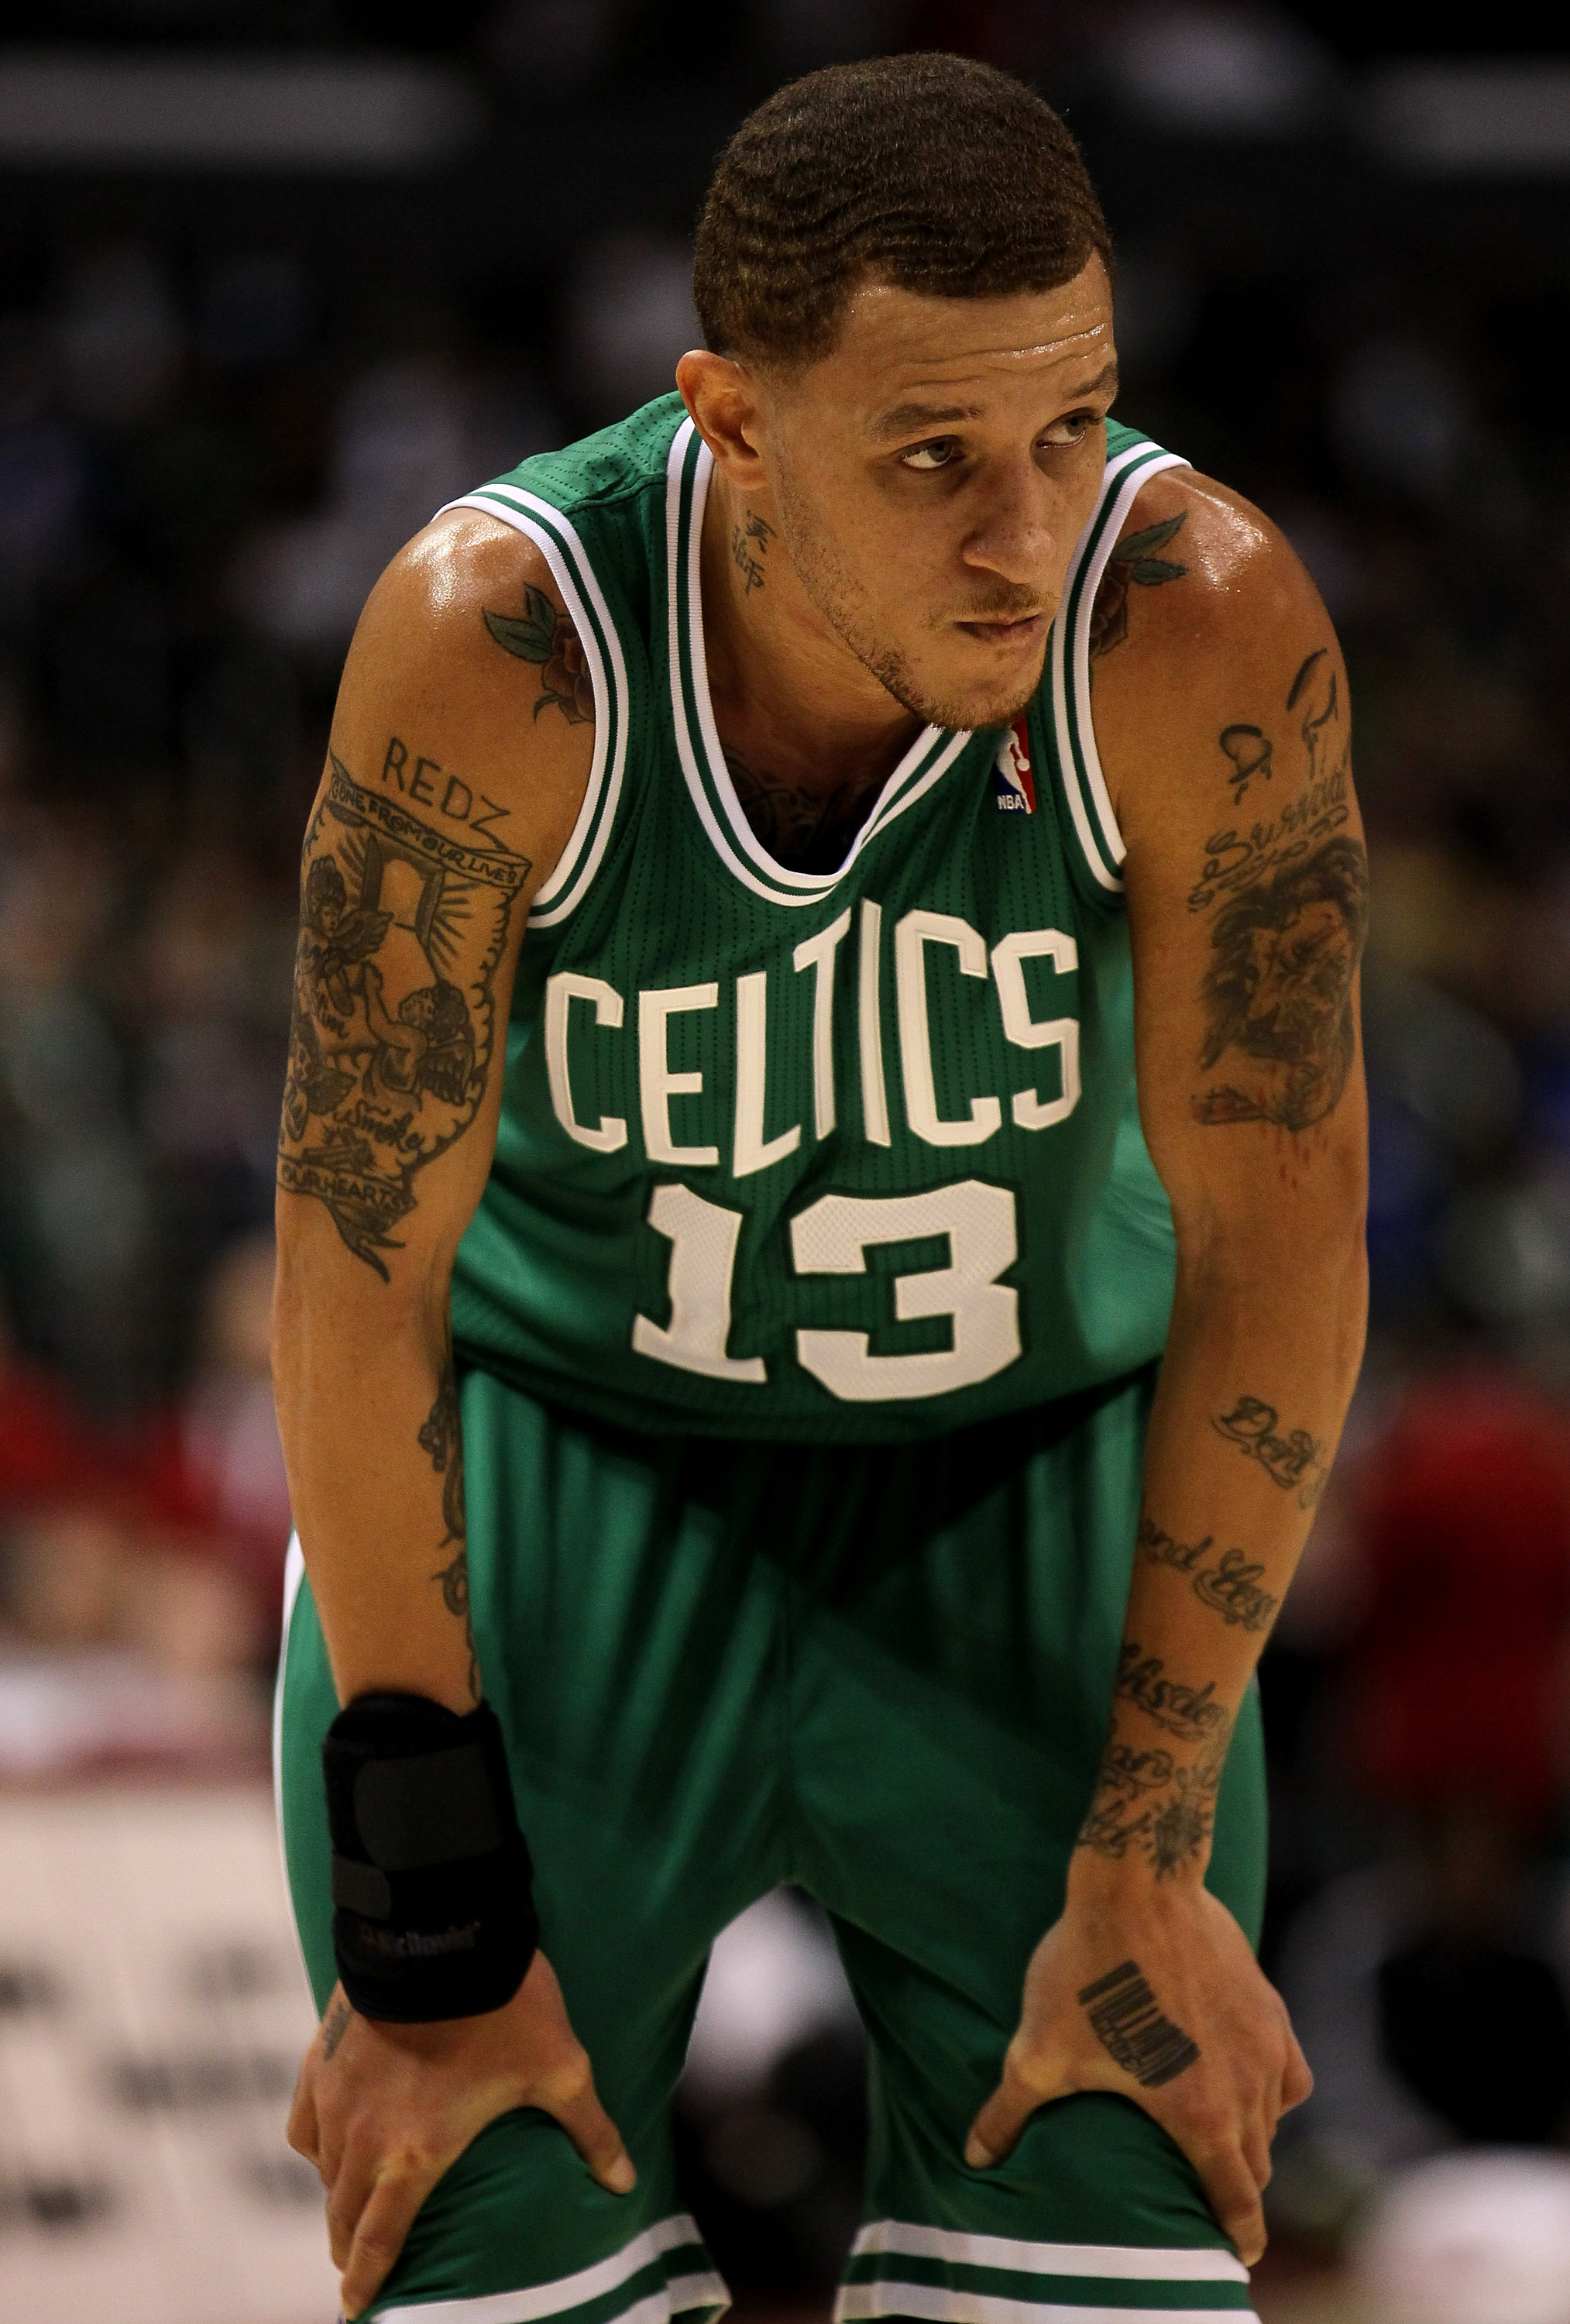 Not in Hall of Fame - 47. Delonte West